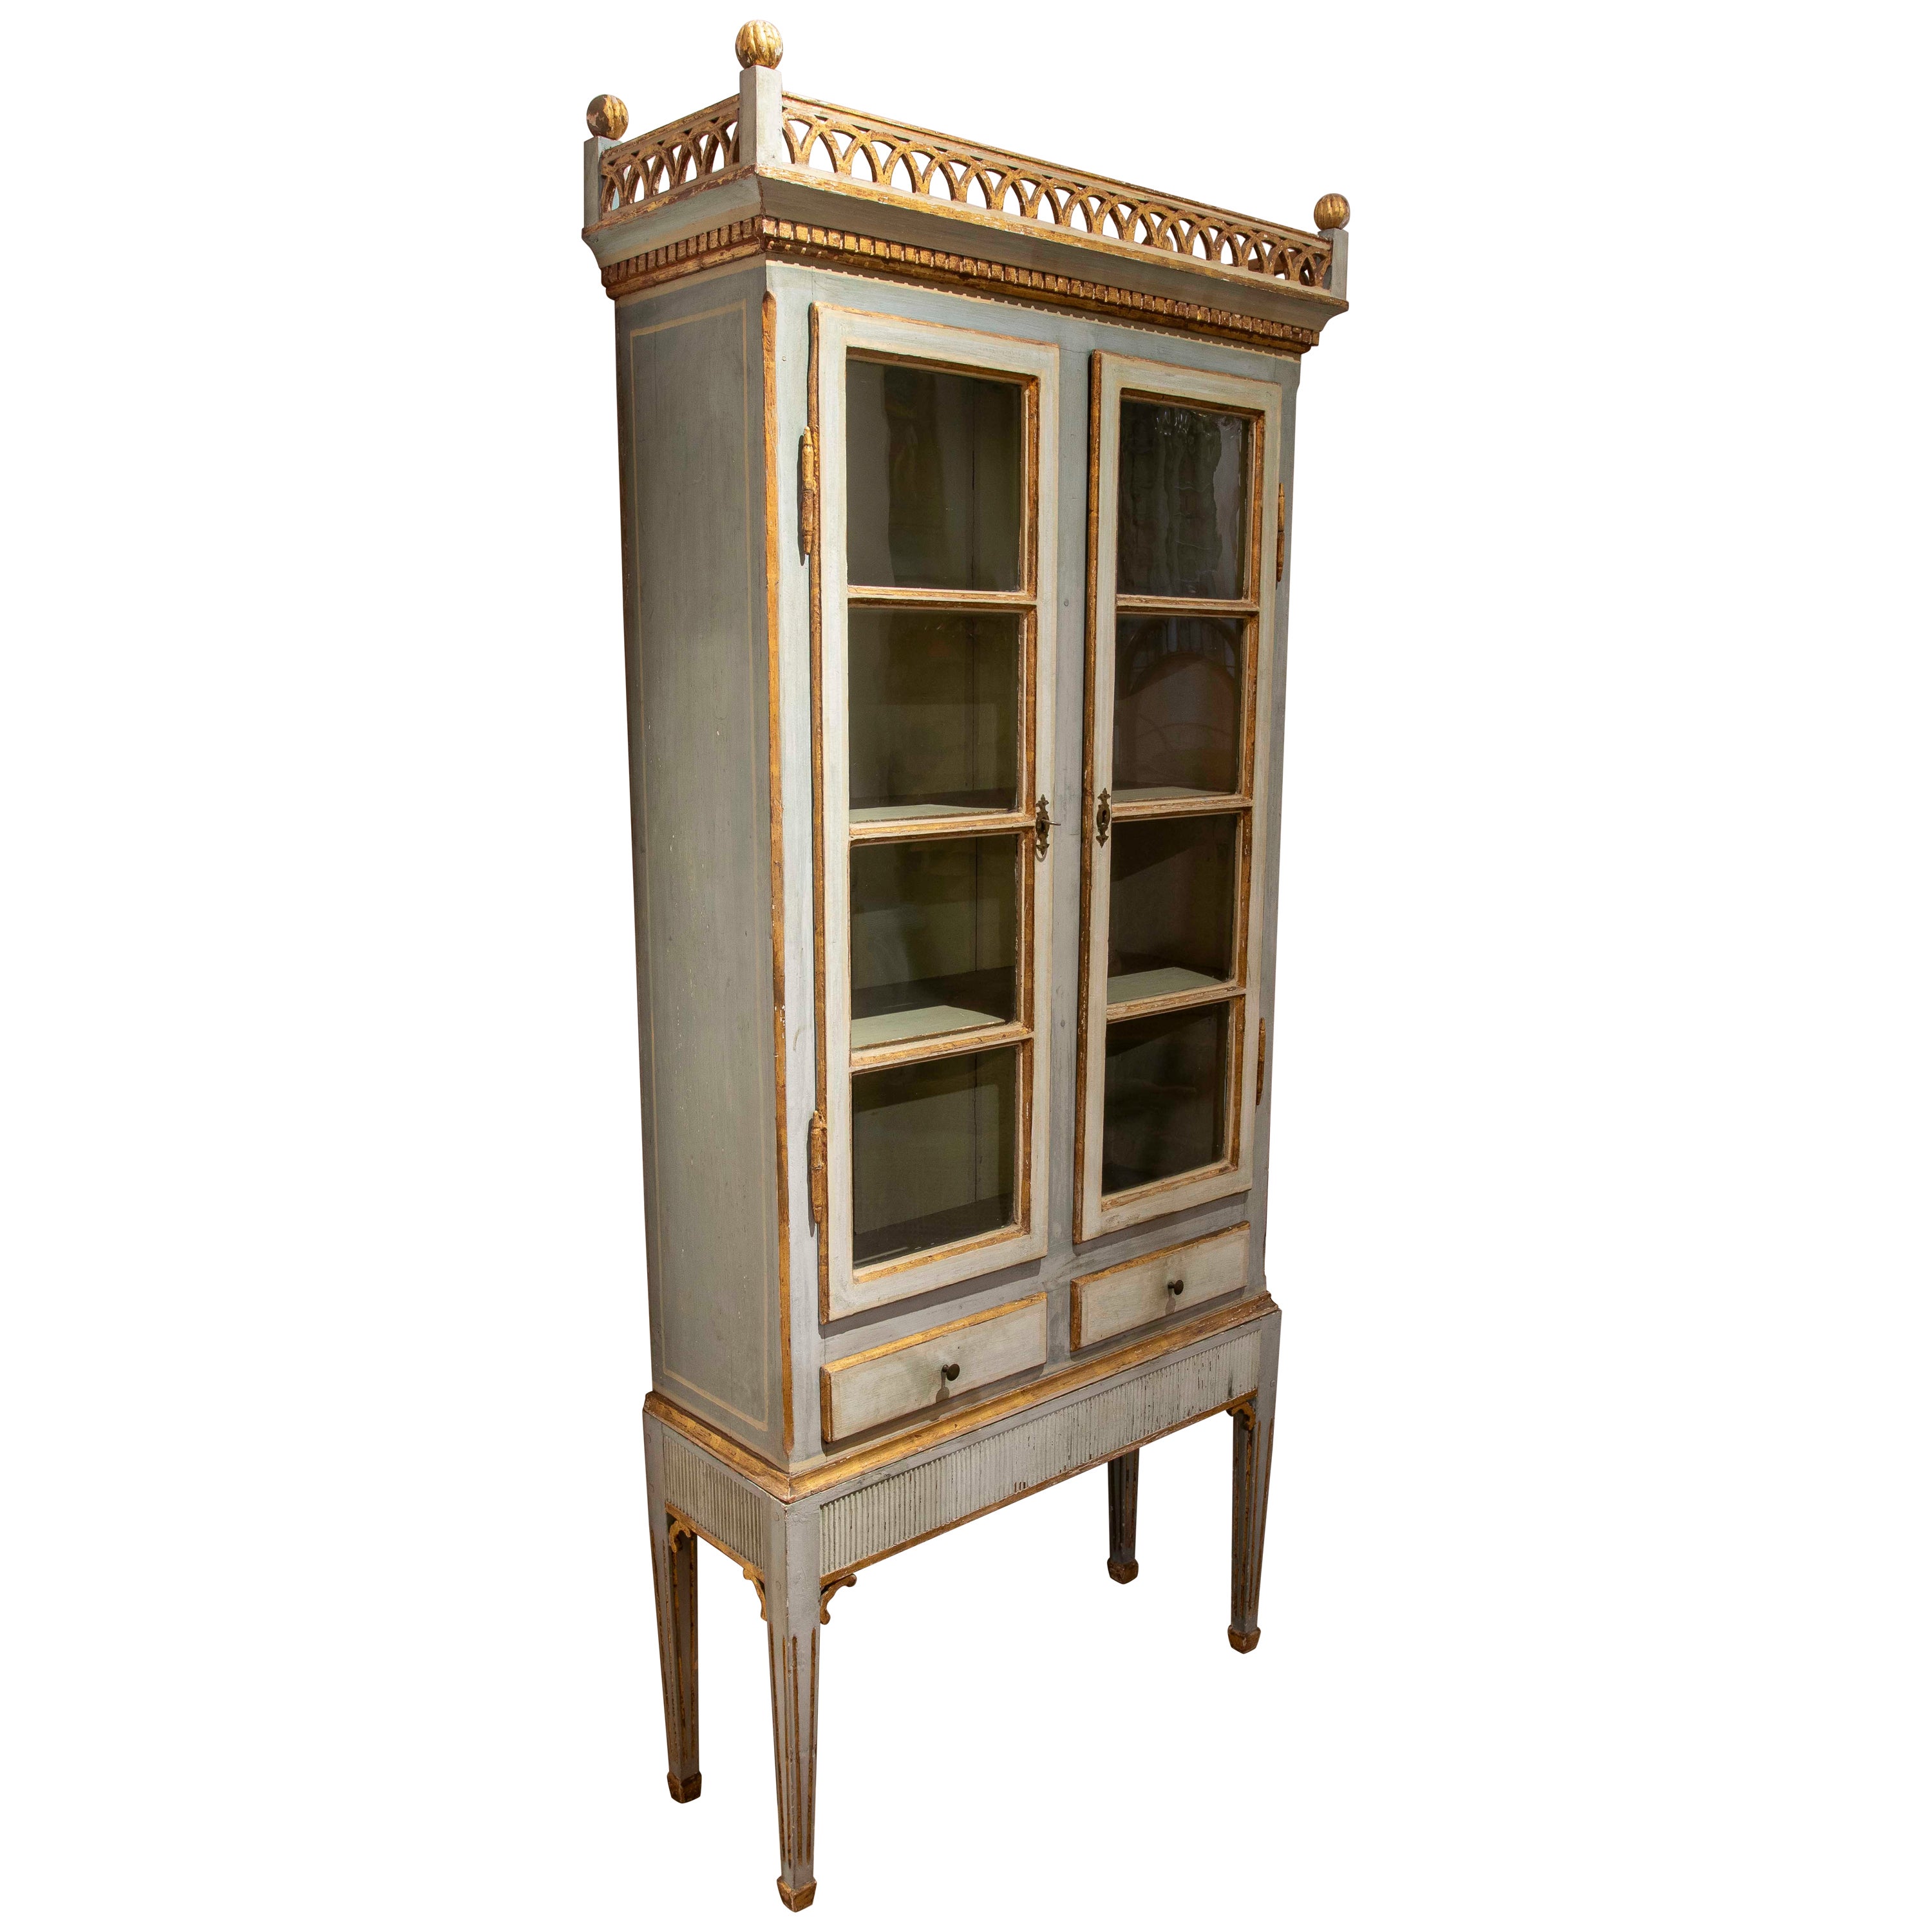 19th C. Wooden Showcase with Doors and Drawers and with its Original Polychome